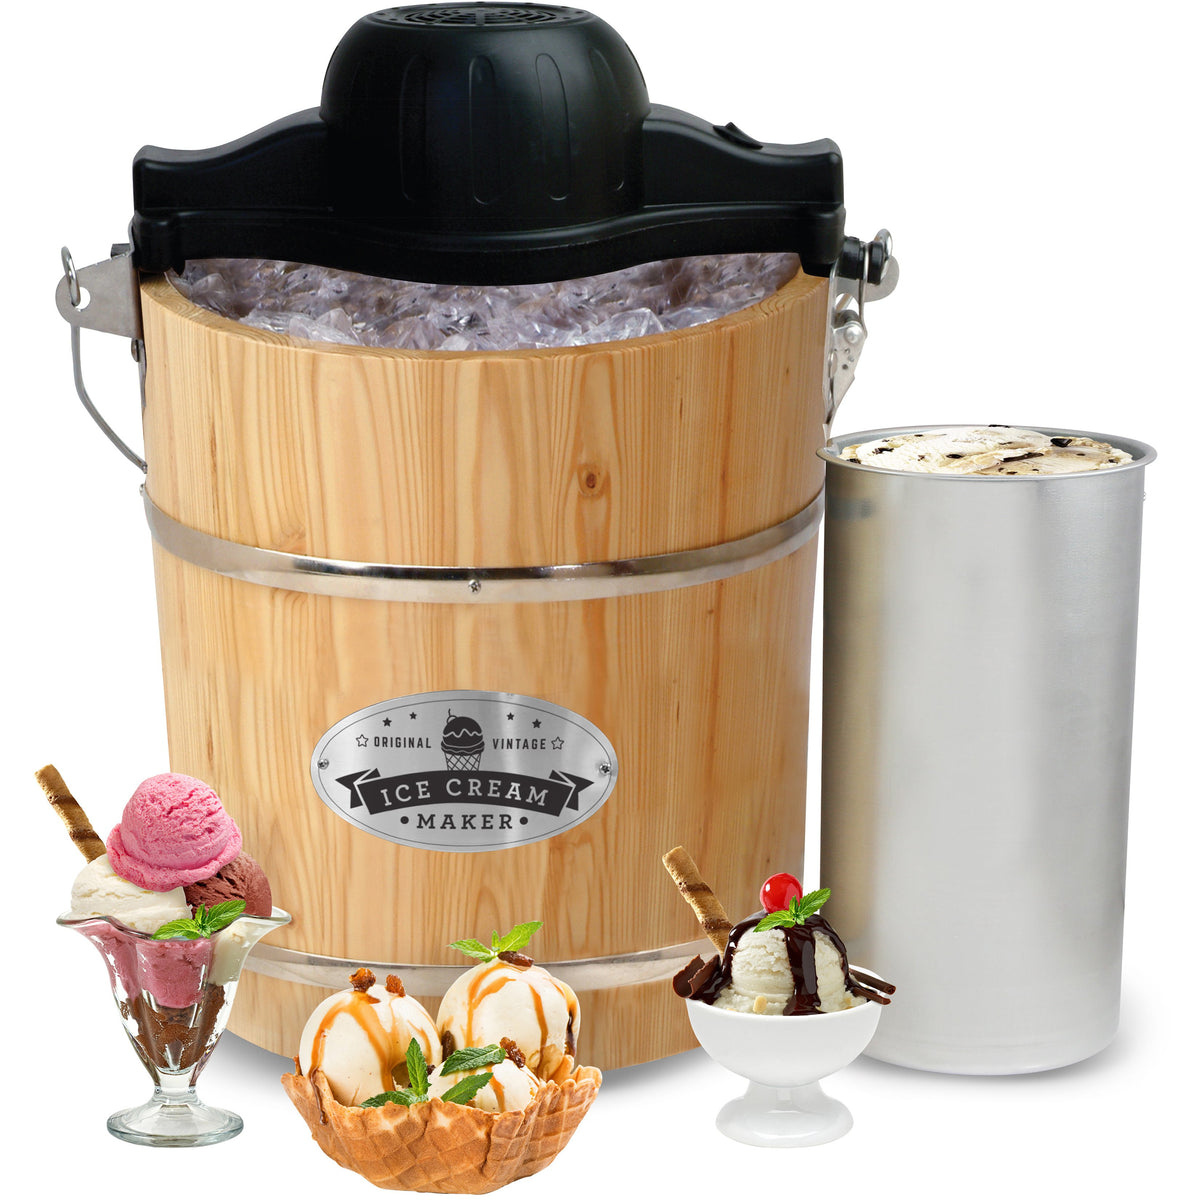 Sold at Auction: Elite Gourmet Electric Ice Cream Maker, like new